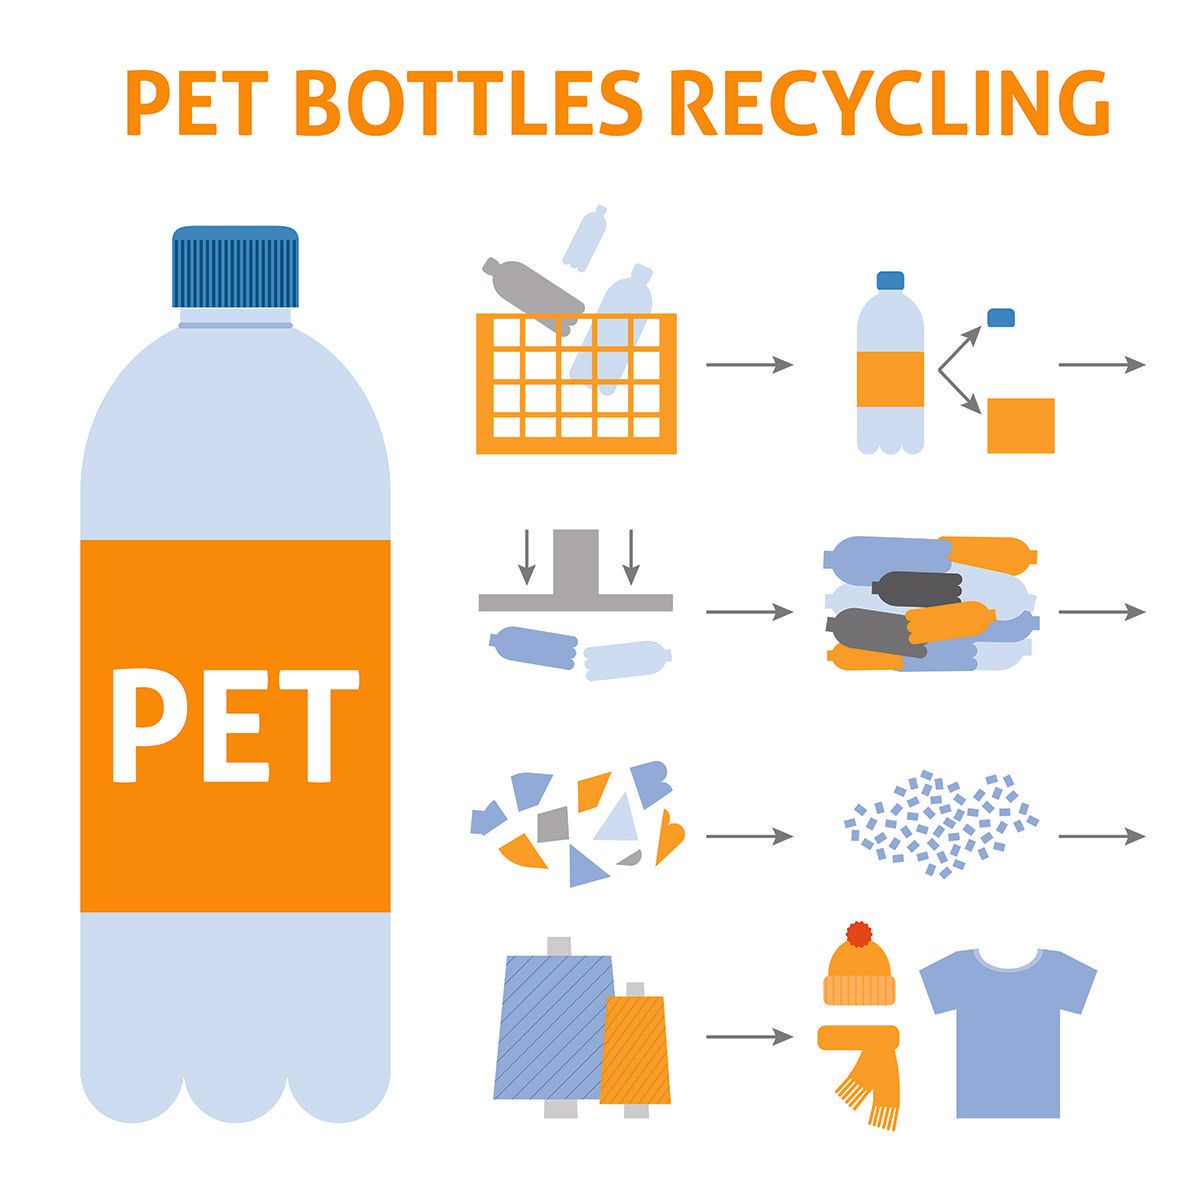 Graphic showing the process of recycling plastic bottles.